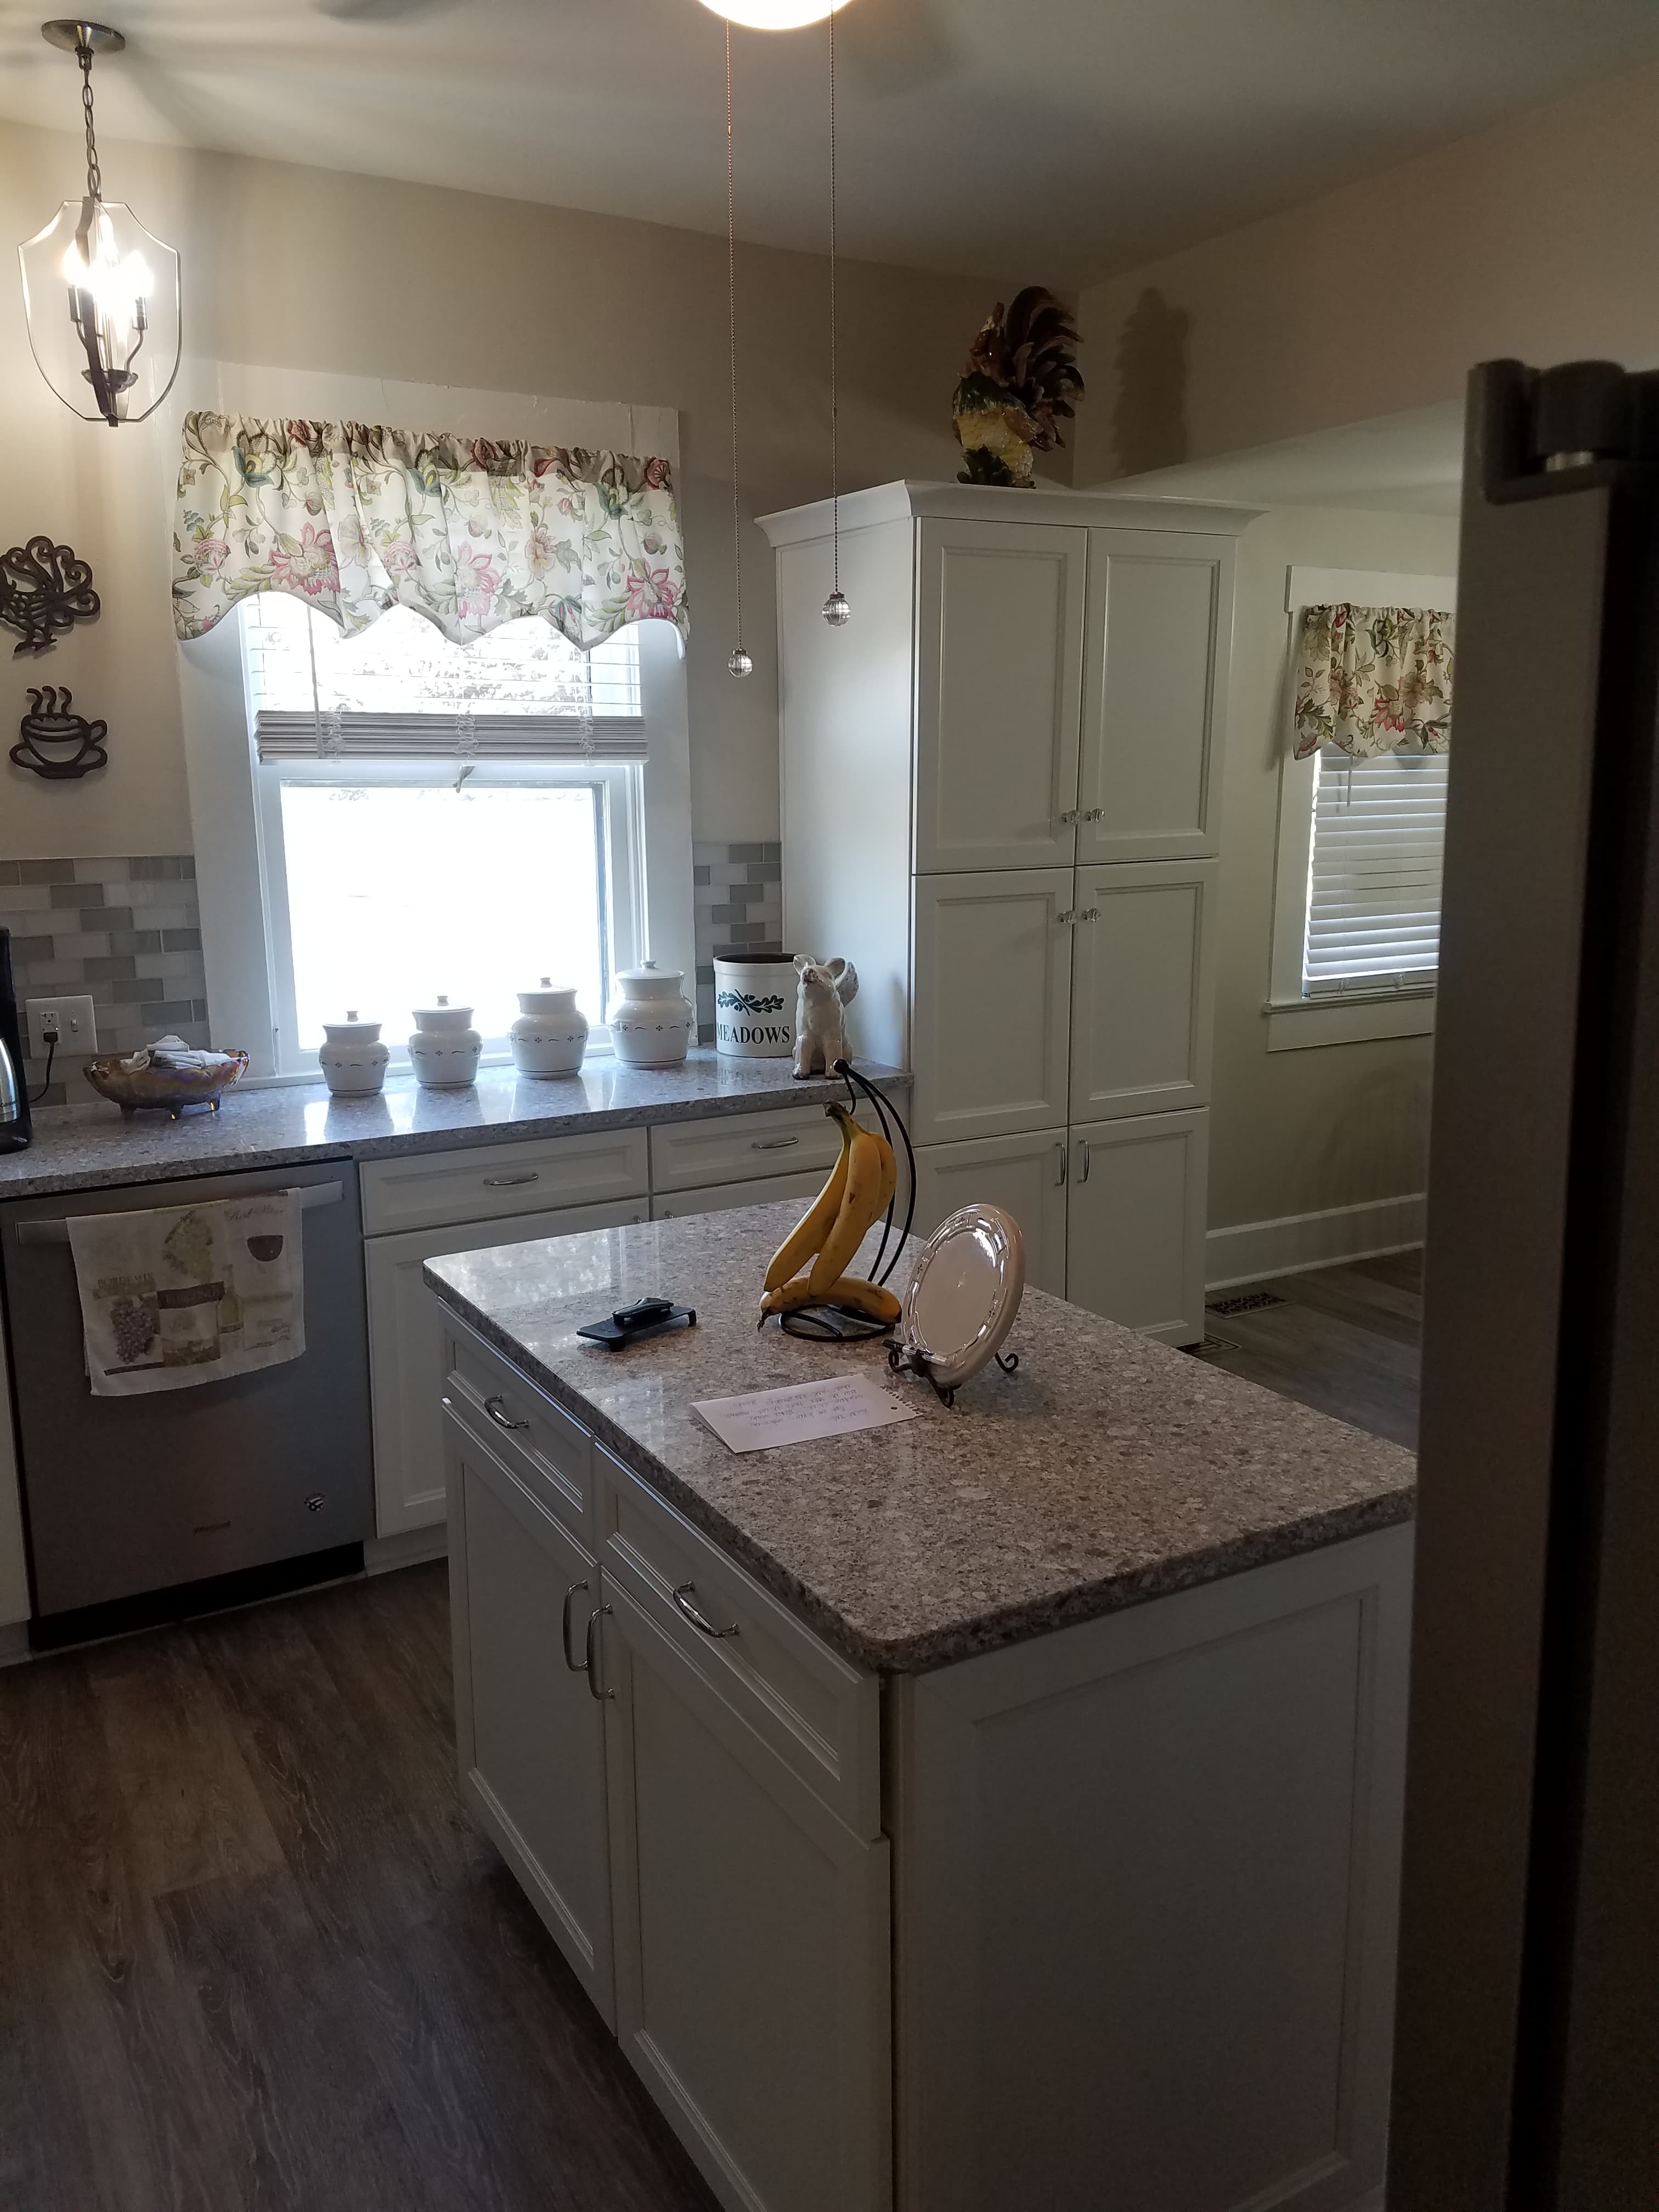 Solid surface counter tops island view